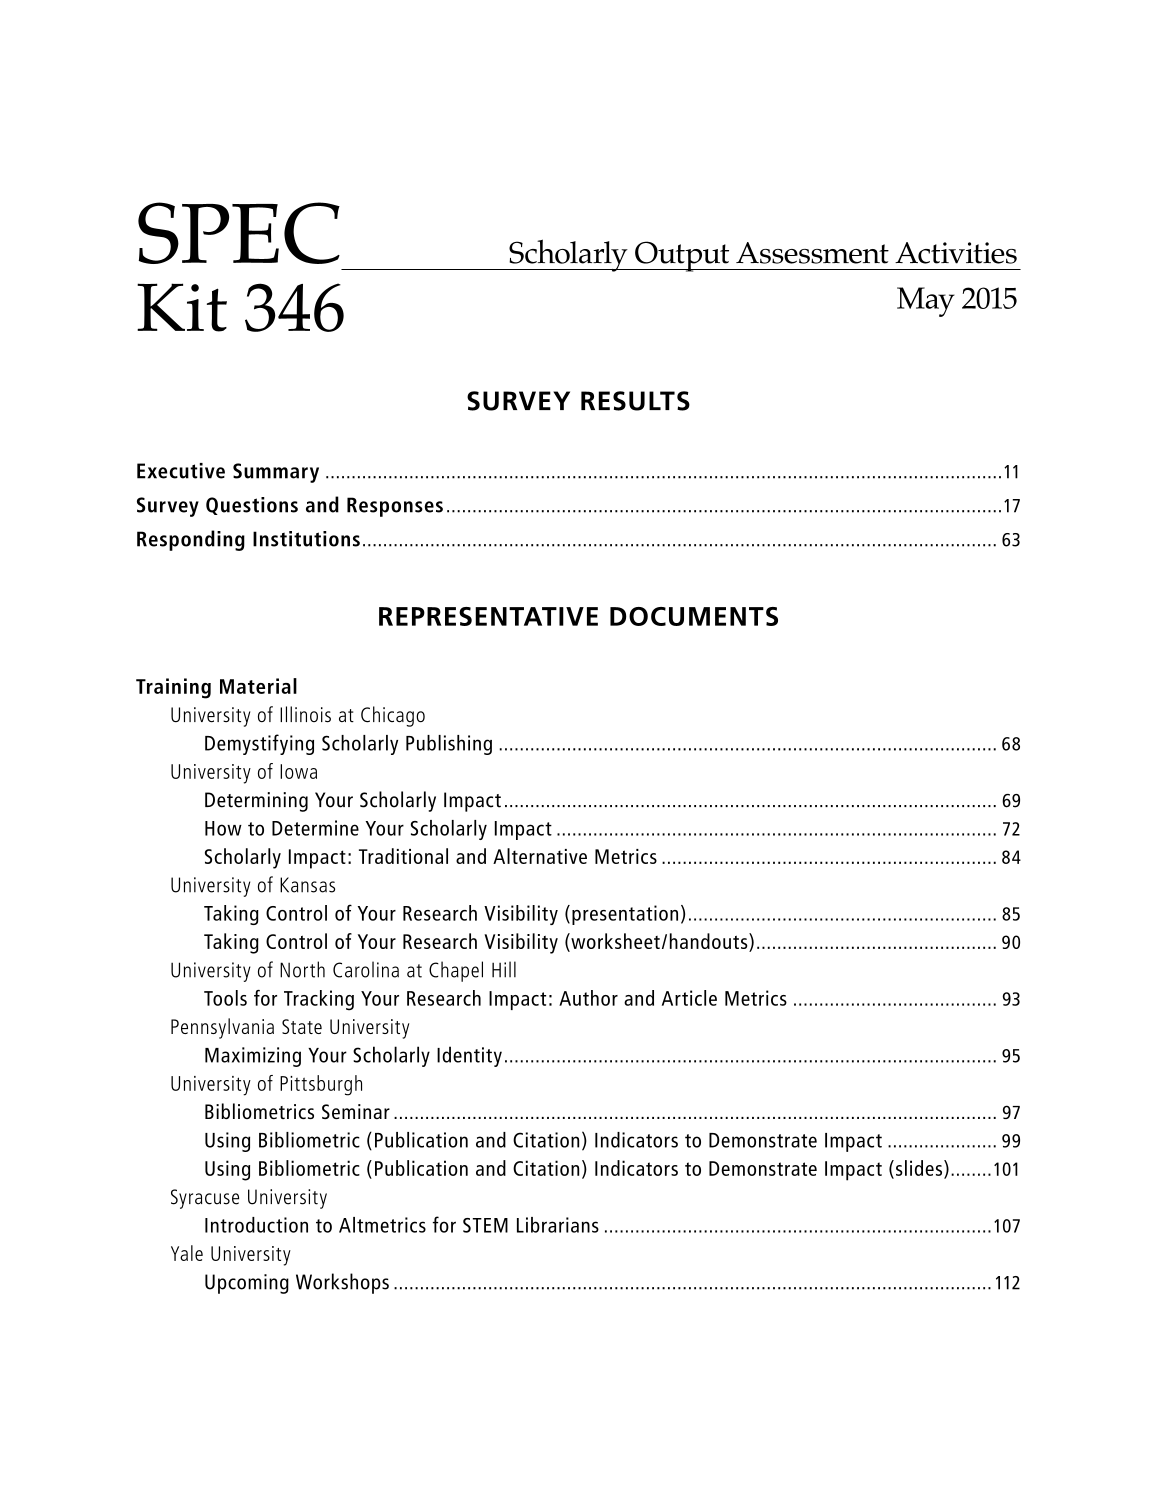 SPEC Kit 346: Scholarly Output Assessment Activities (May 2015) page 5